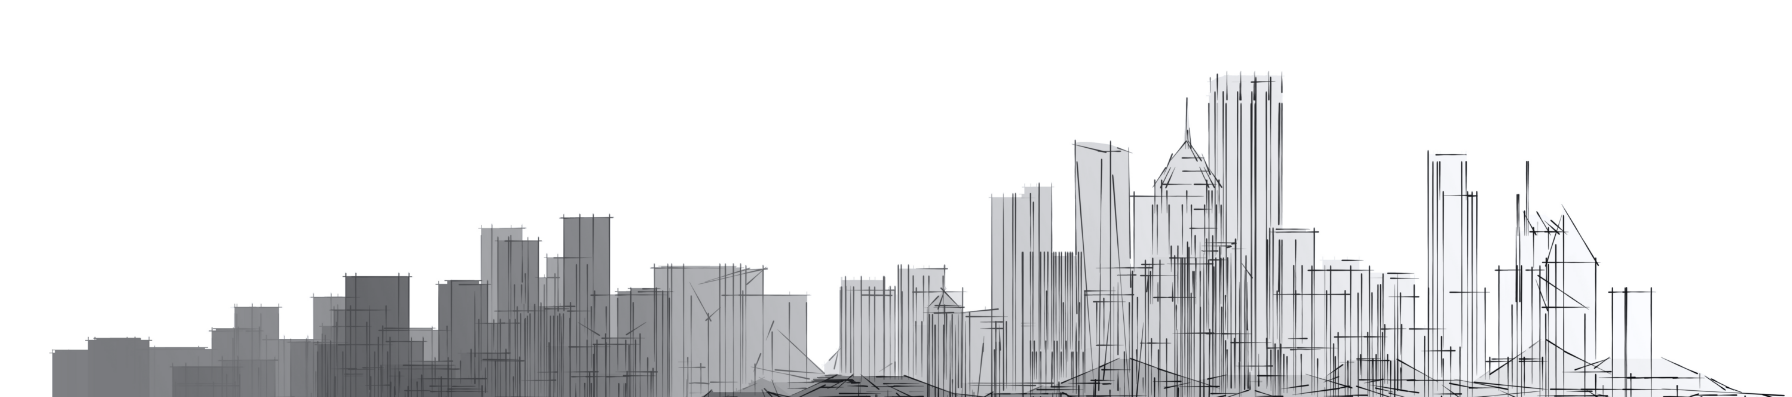 A drawing of a city skyline